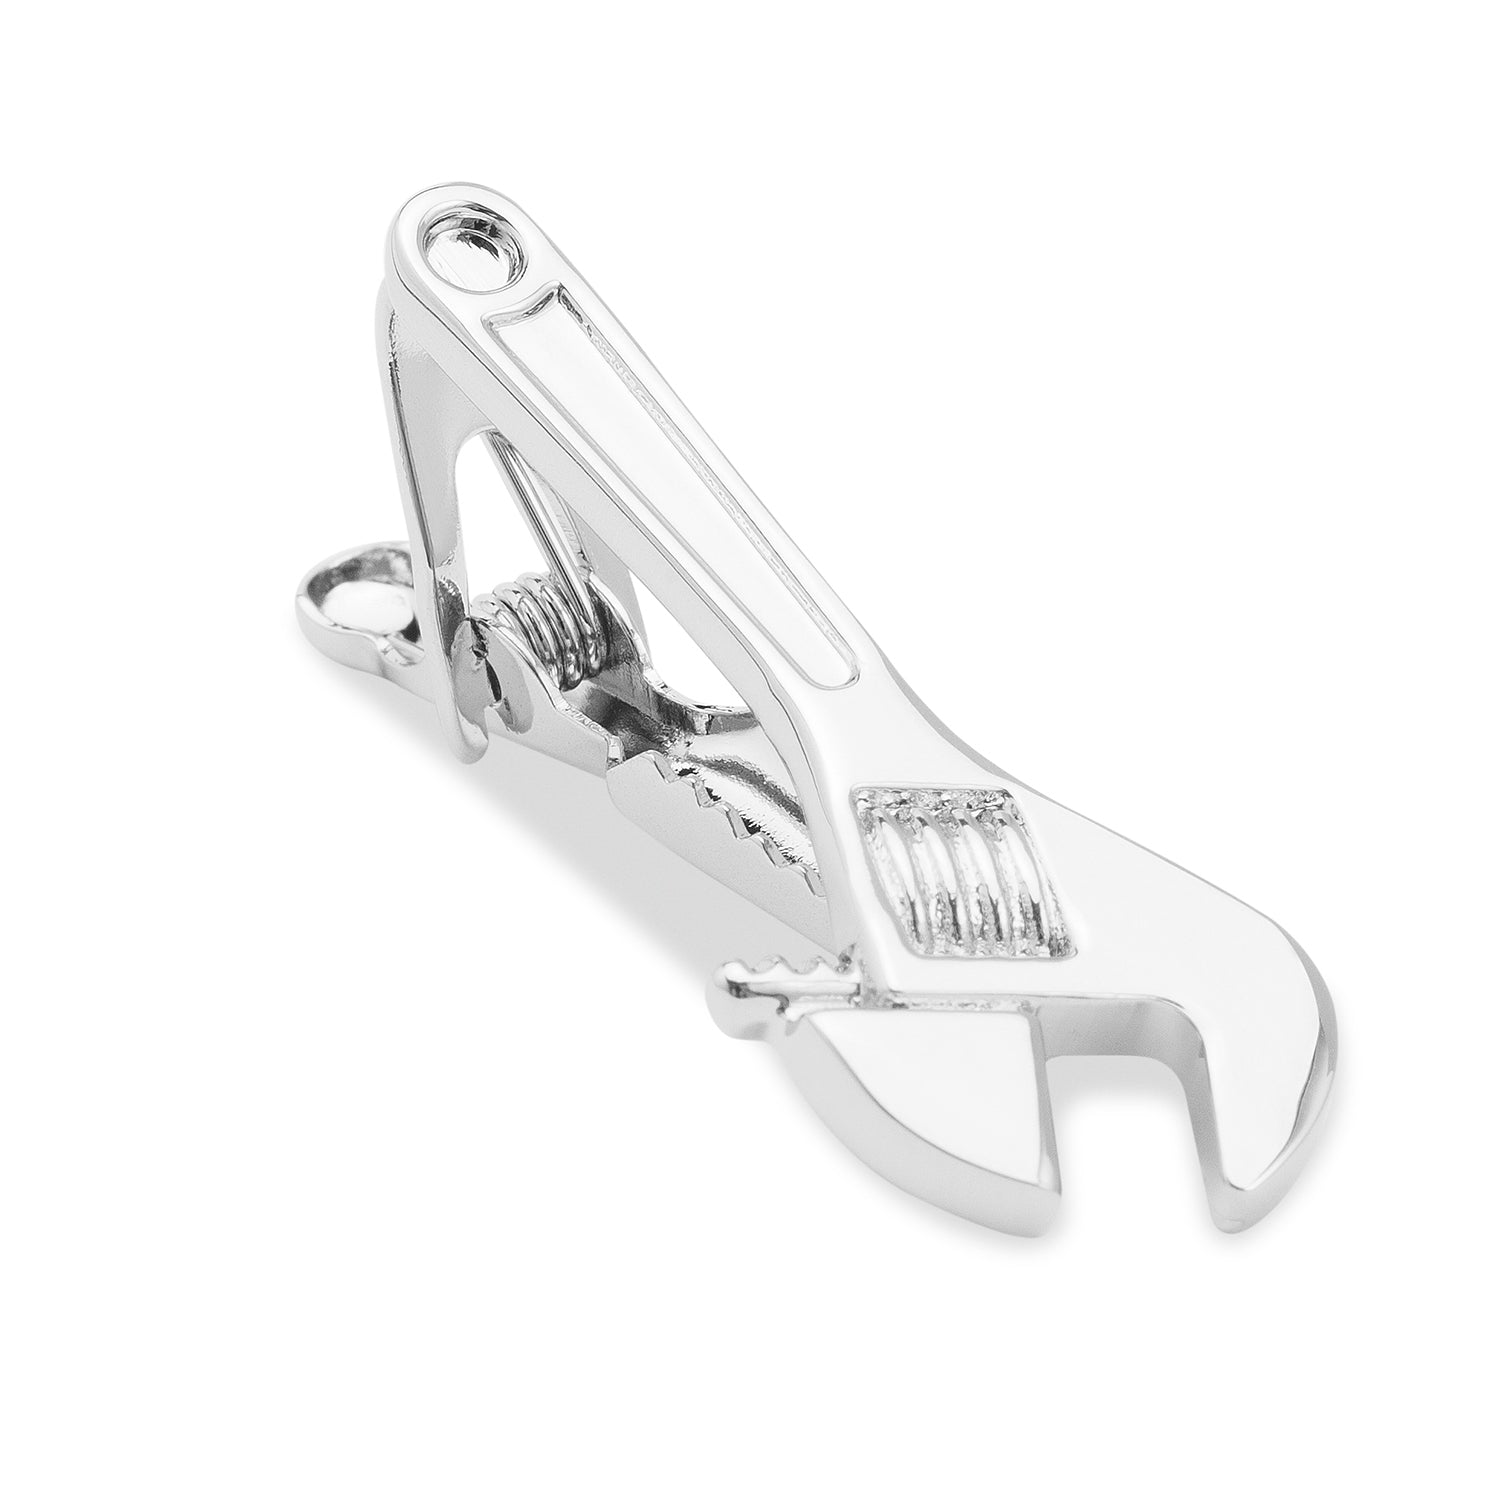 Silver Shifting Spanner Tool Tie Bar